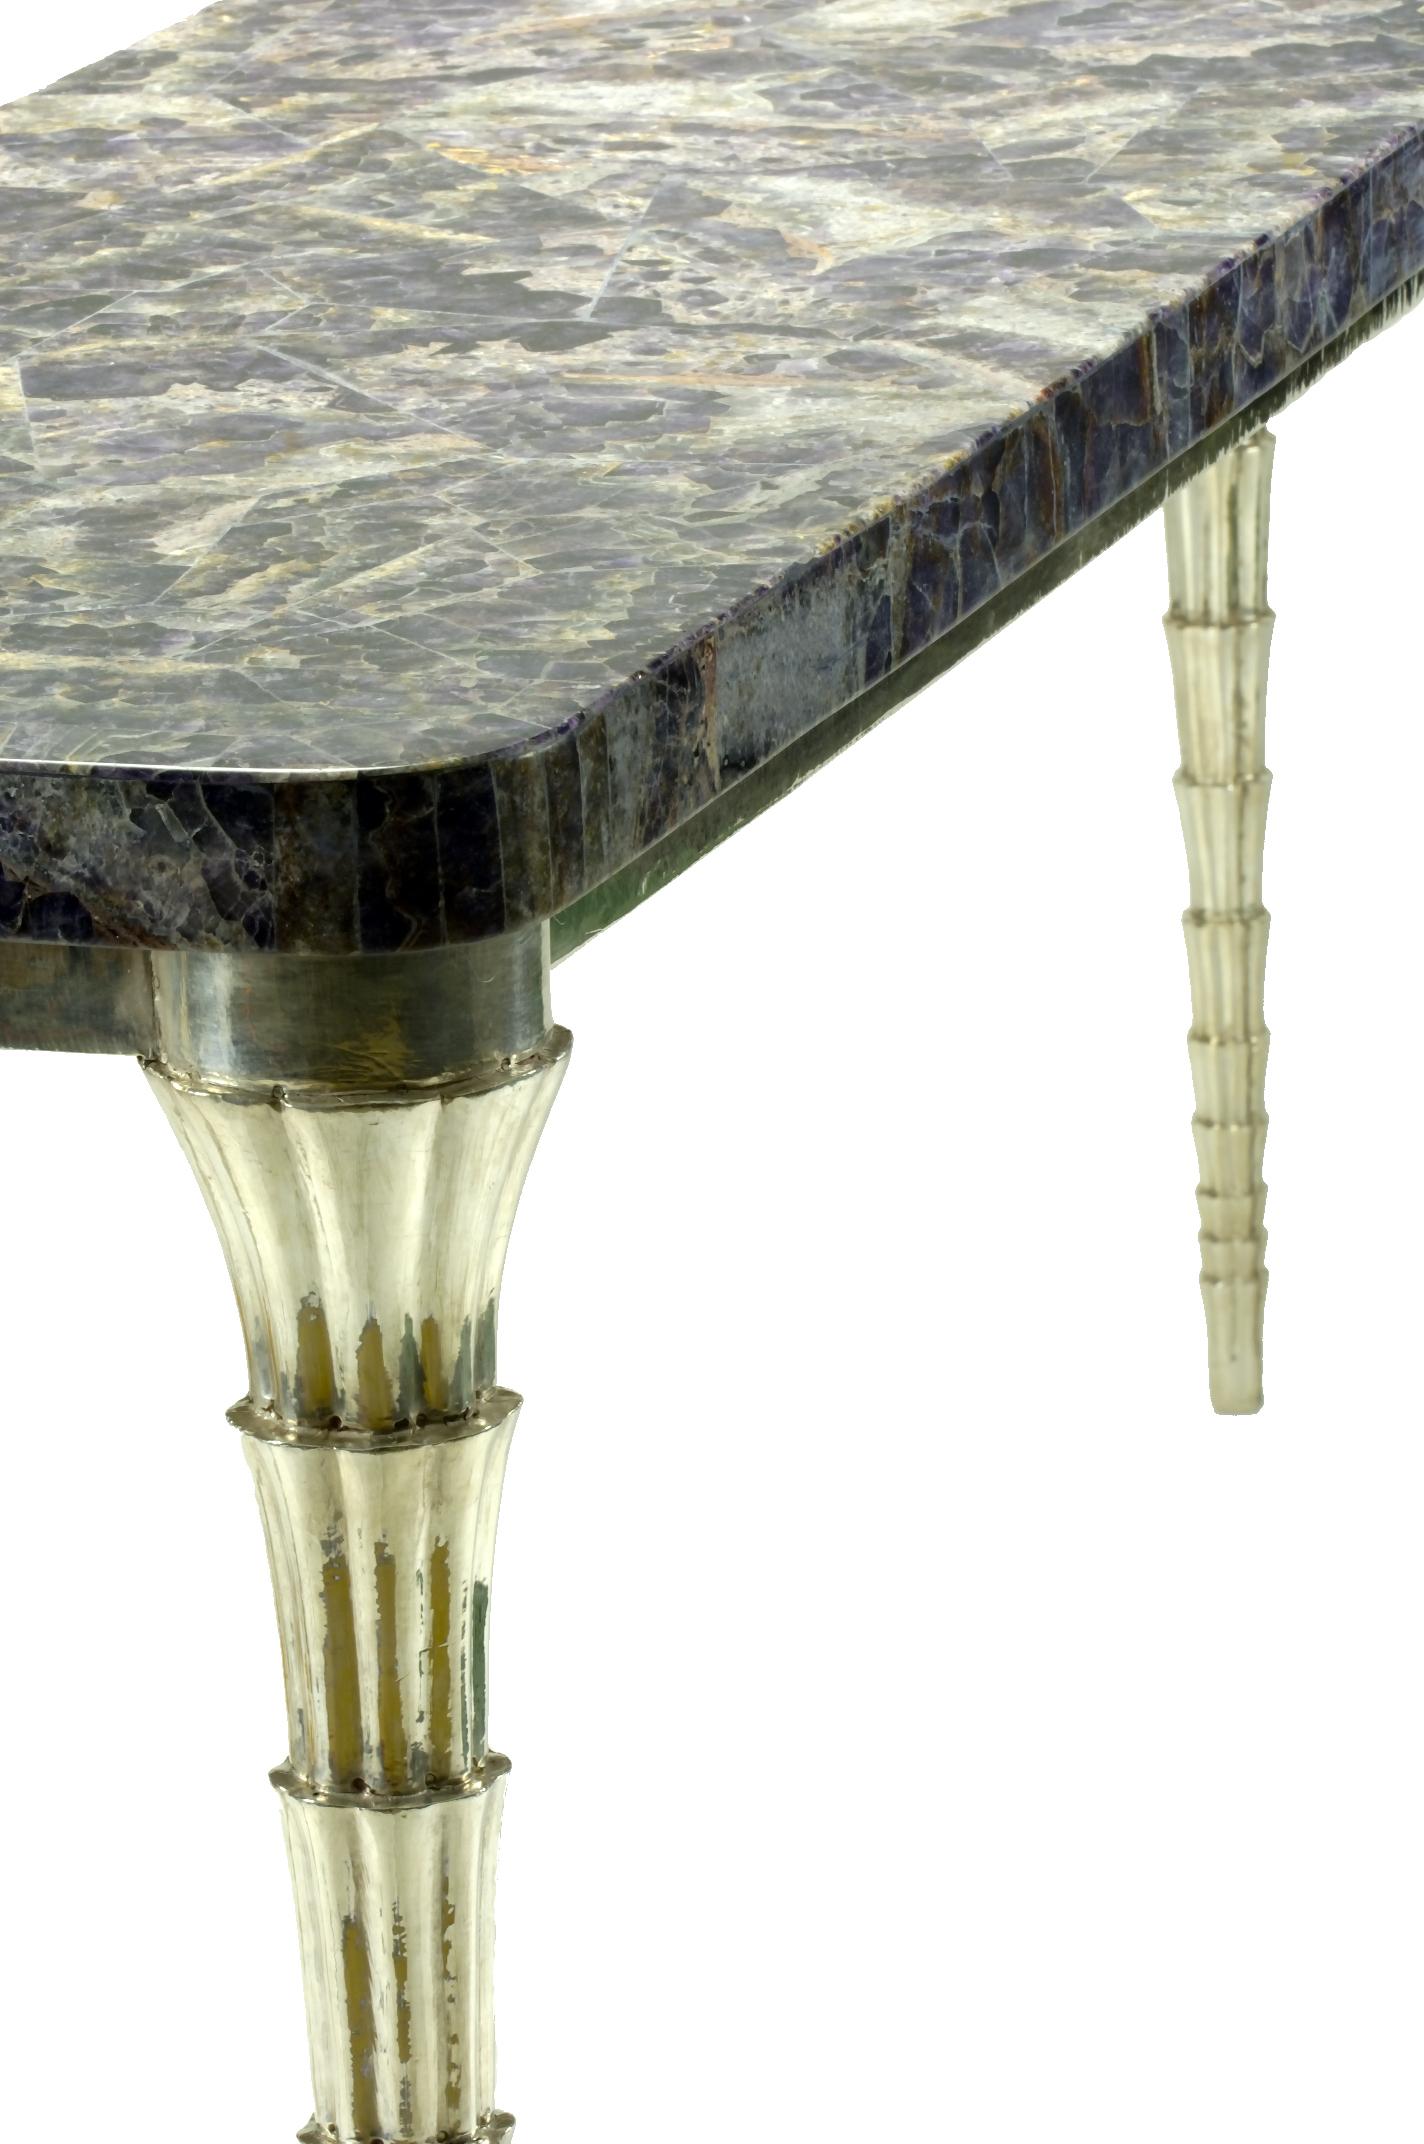 Carved Long Narrow Console Table in Amethyst and White Bronze Clad Hand-Made by Paul For Sale